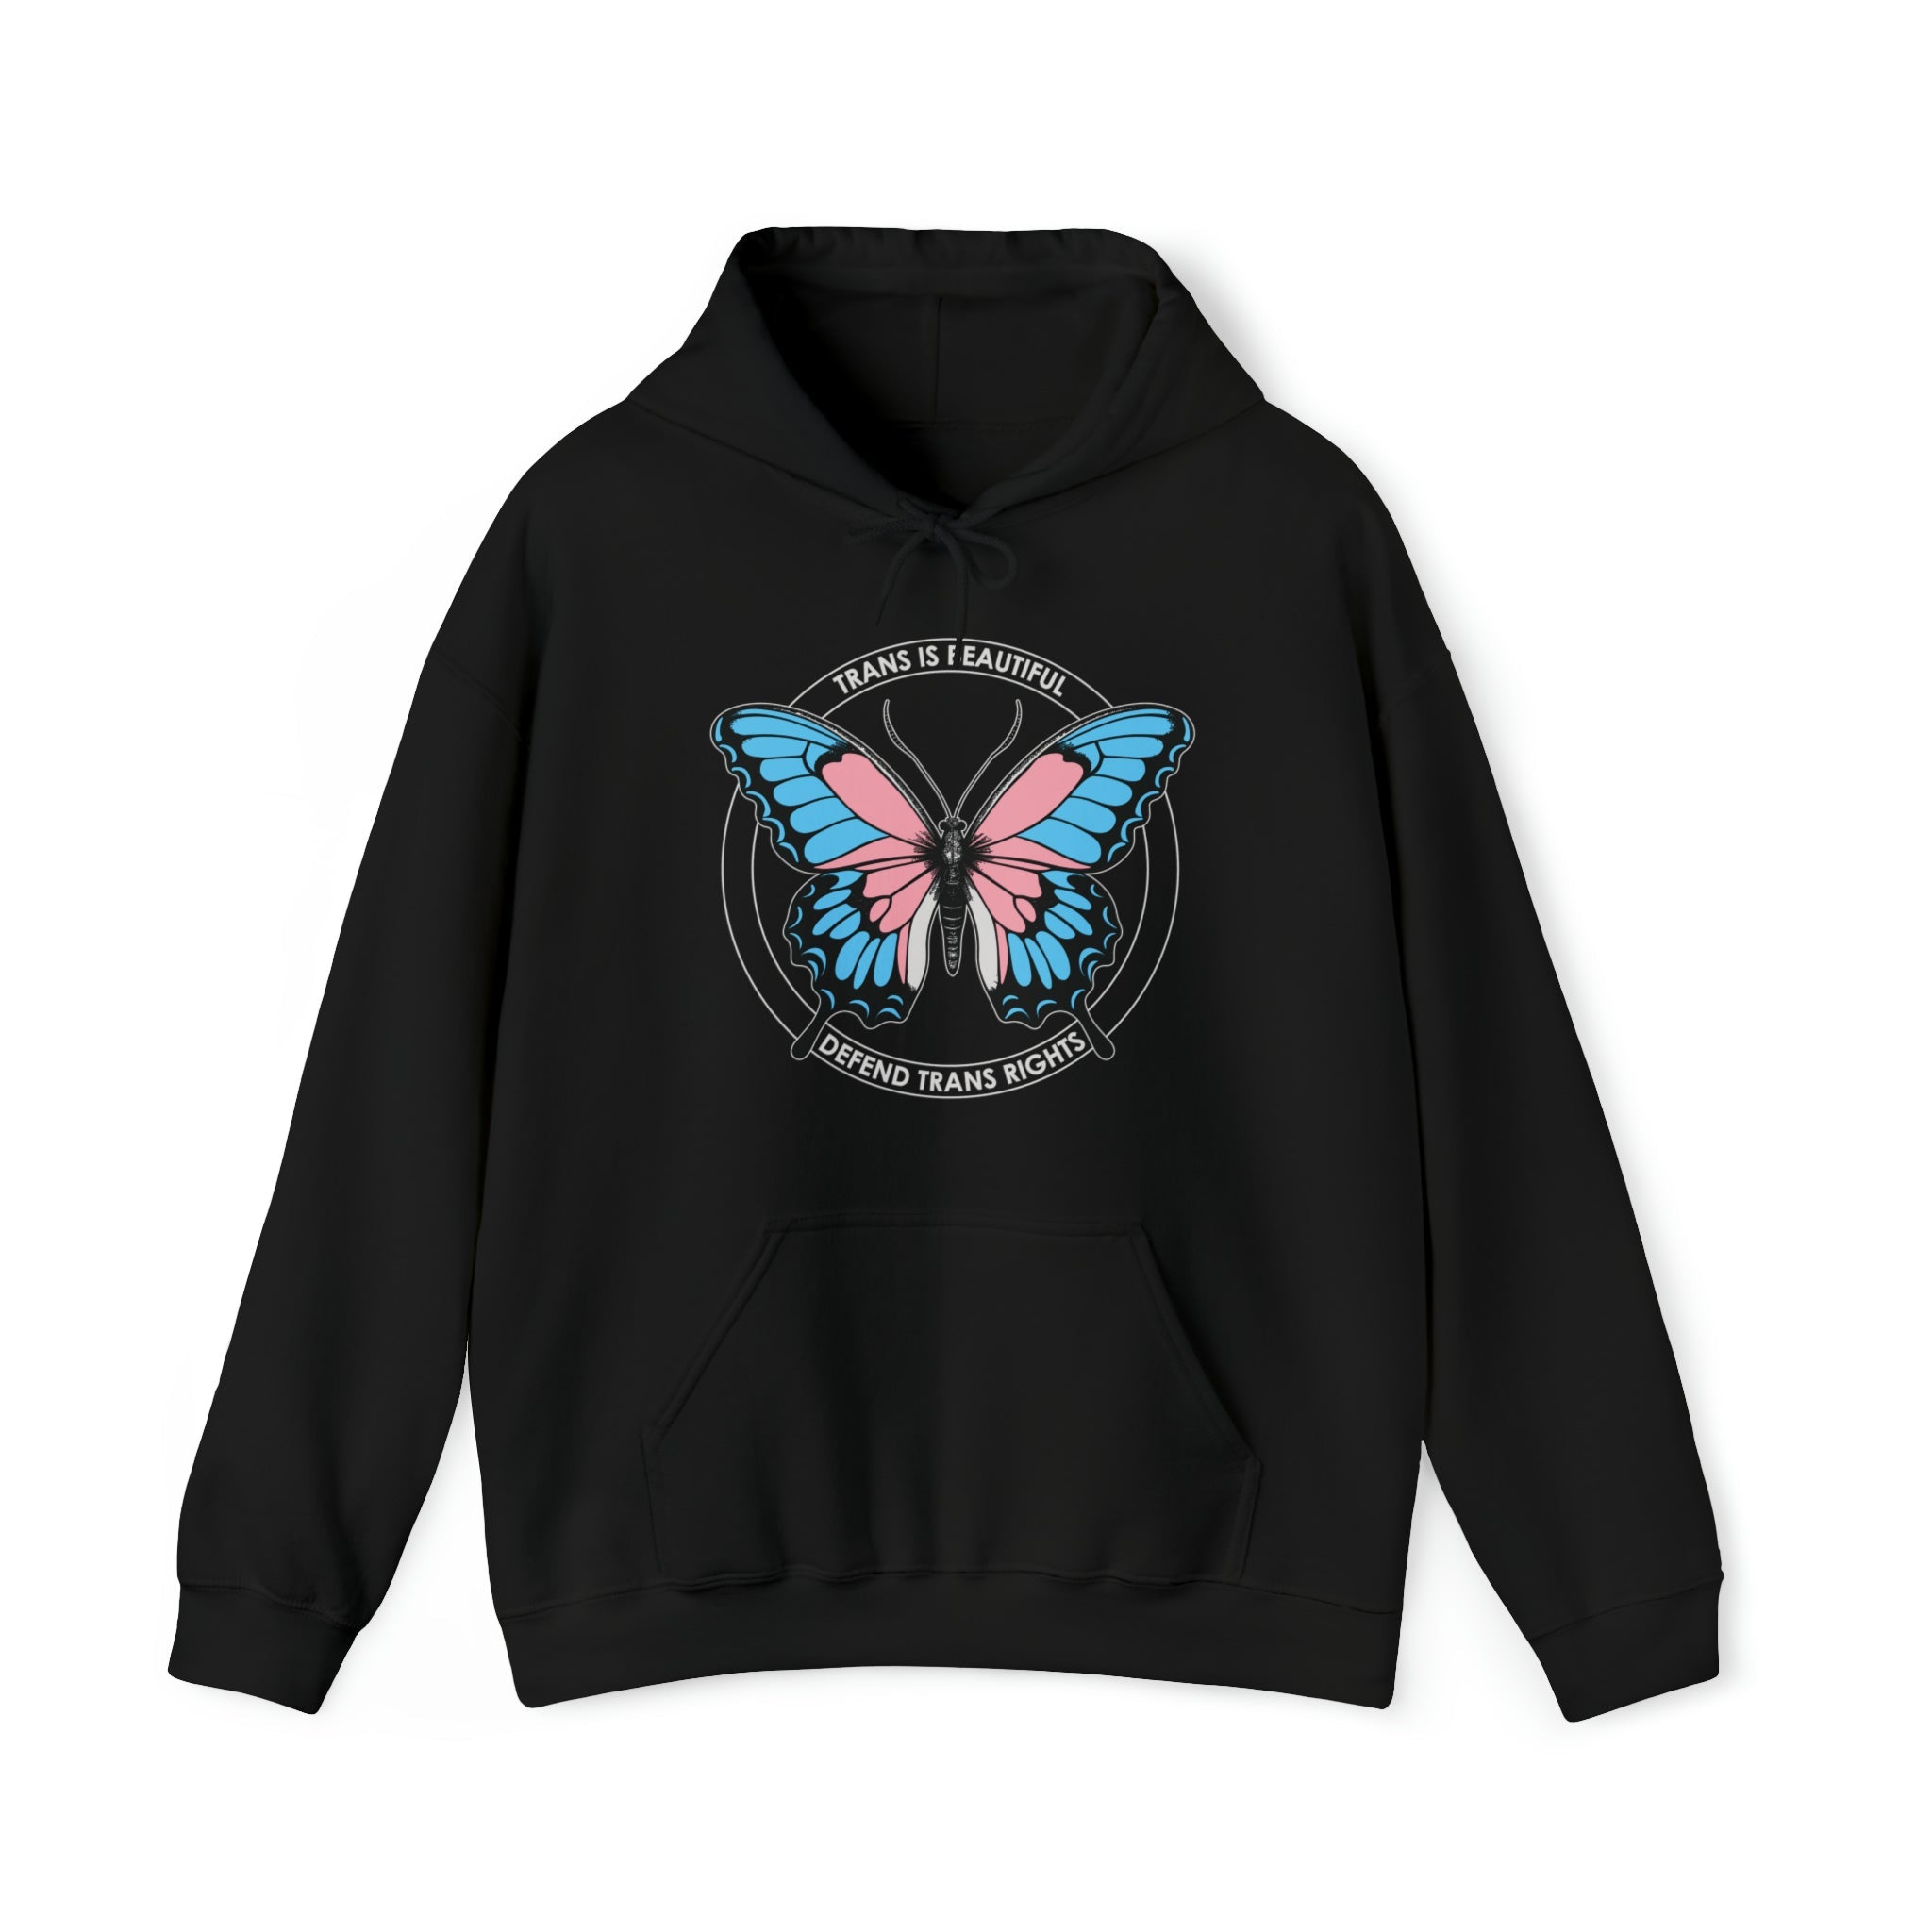 "Trans is Beautiful, Defend Trans Rights" Hoodie - Hunky Tops